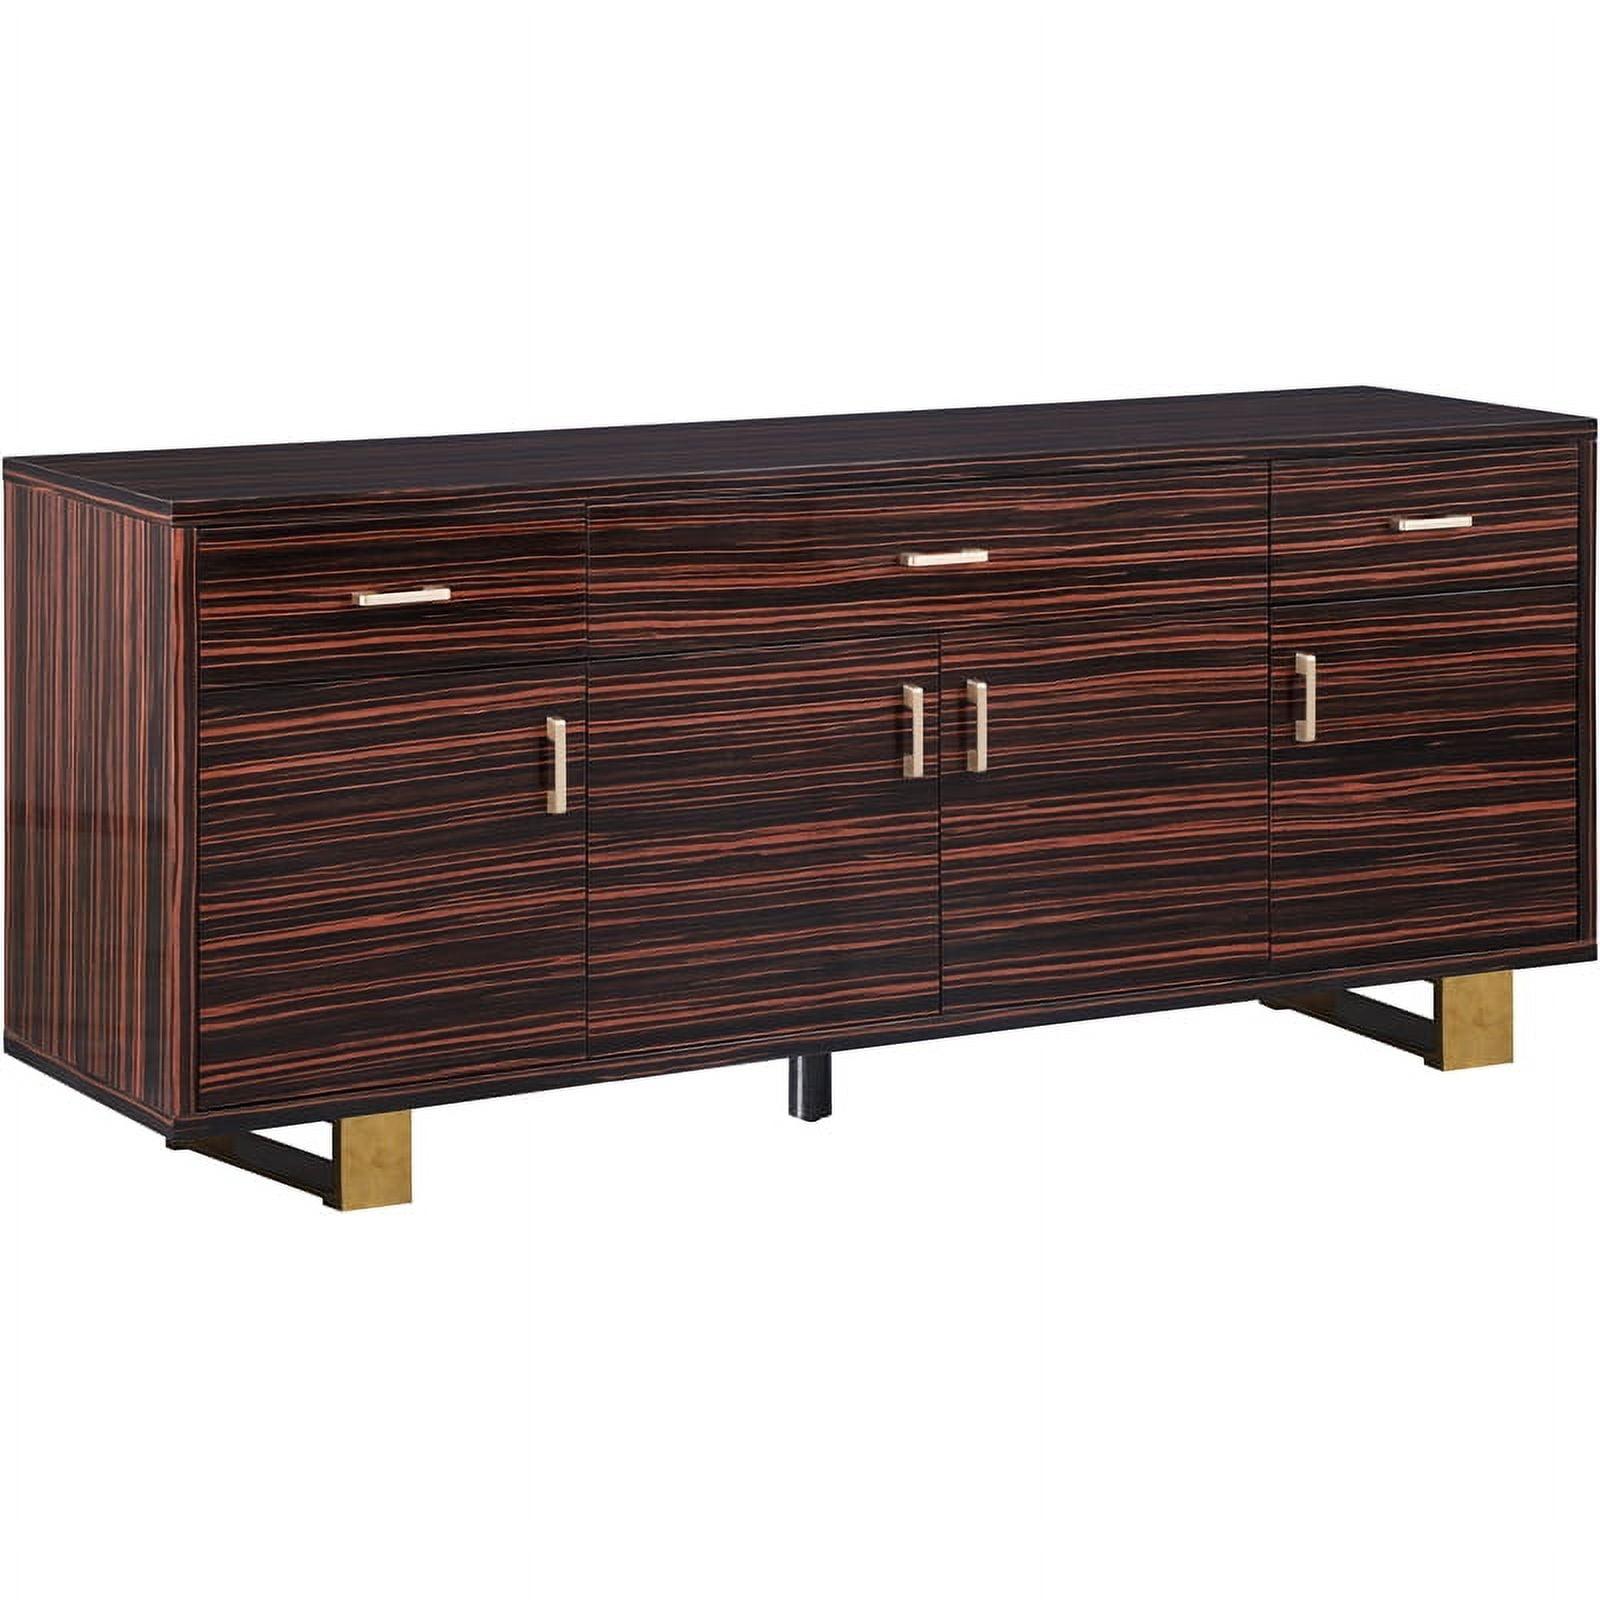 Excel 72" Brown Zebra Wood Sideboard with Gold Base and Handles